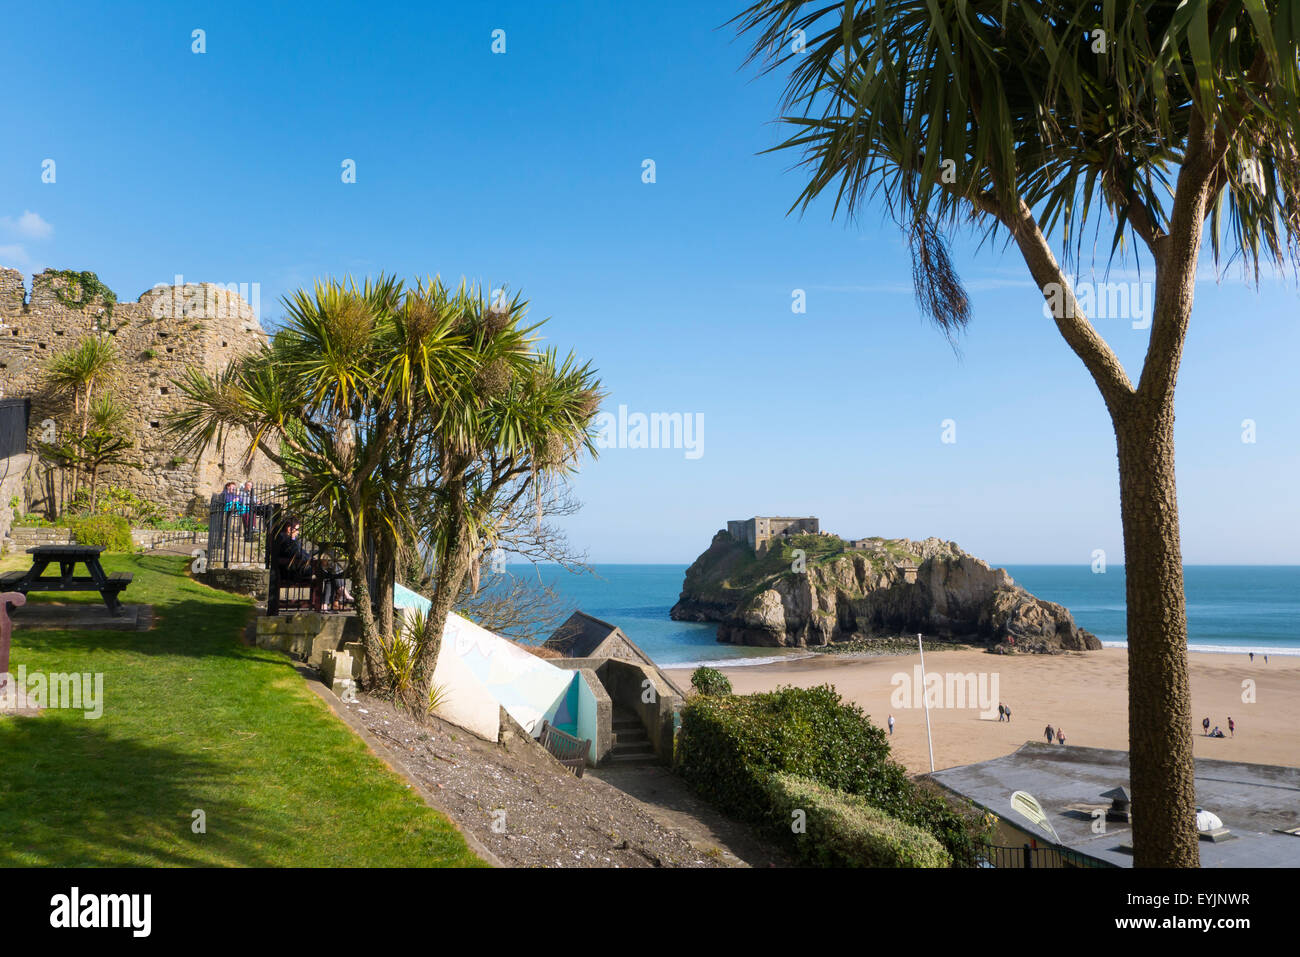 St Catherines Island Tenby, Pembrokeshire Wales Banque D'Images